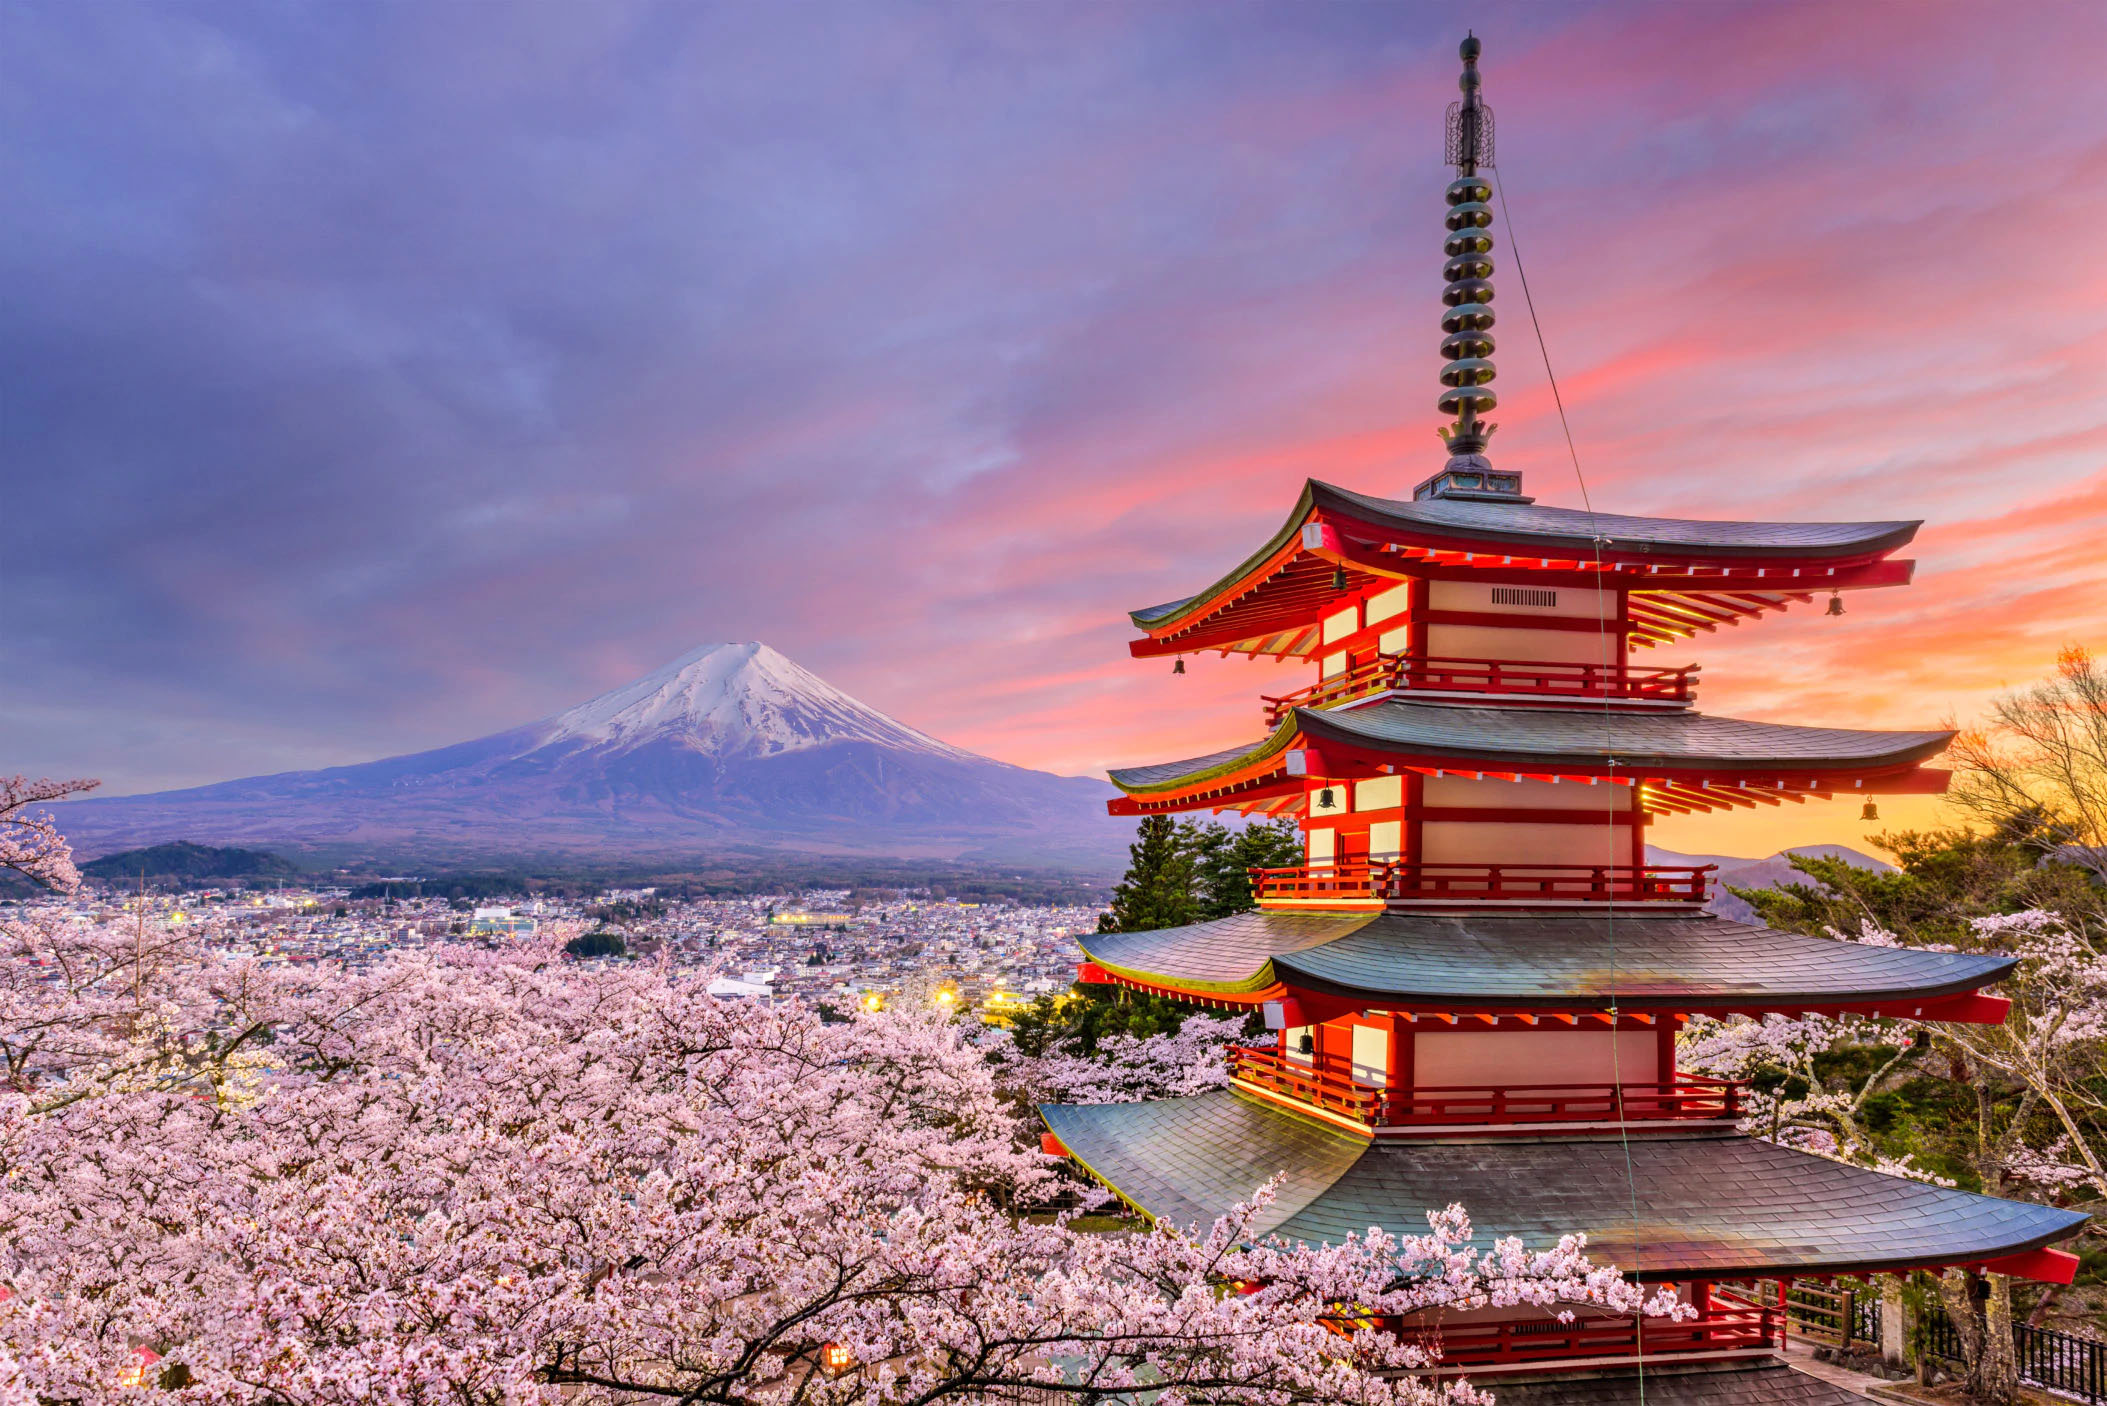 31 interesting facts about Japan